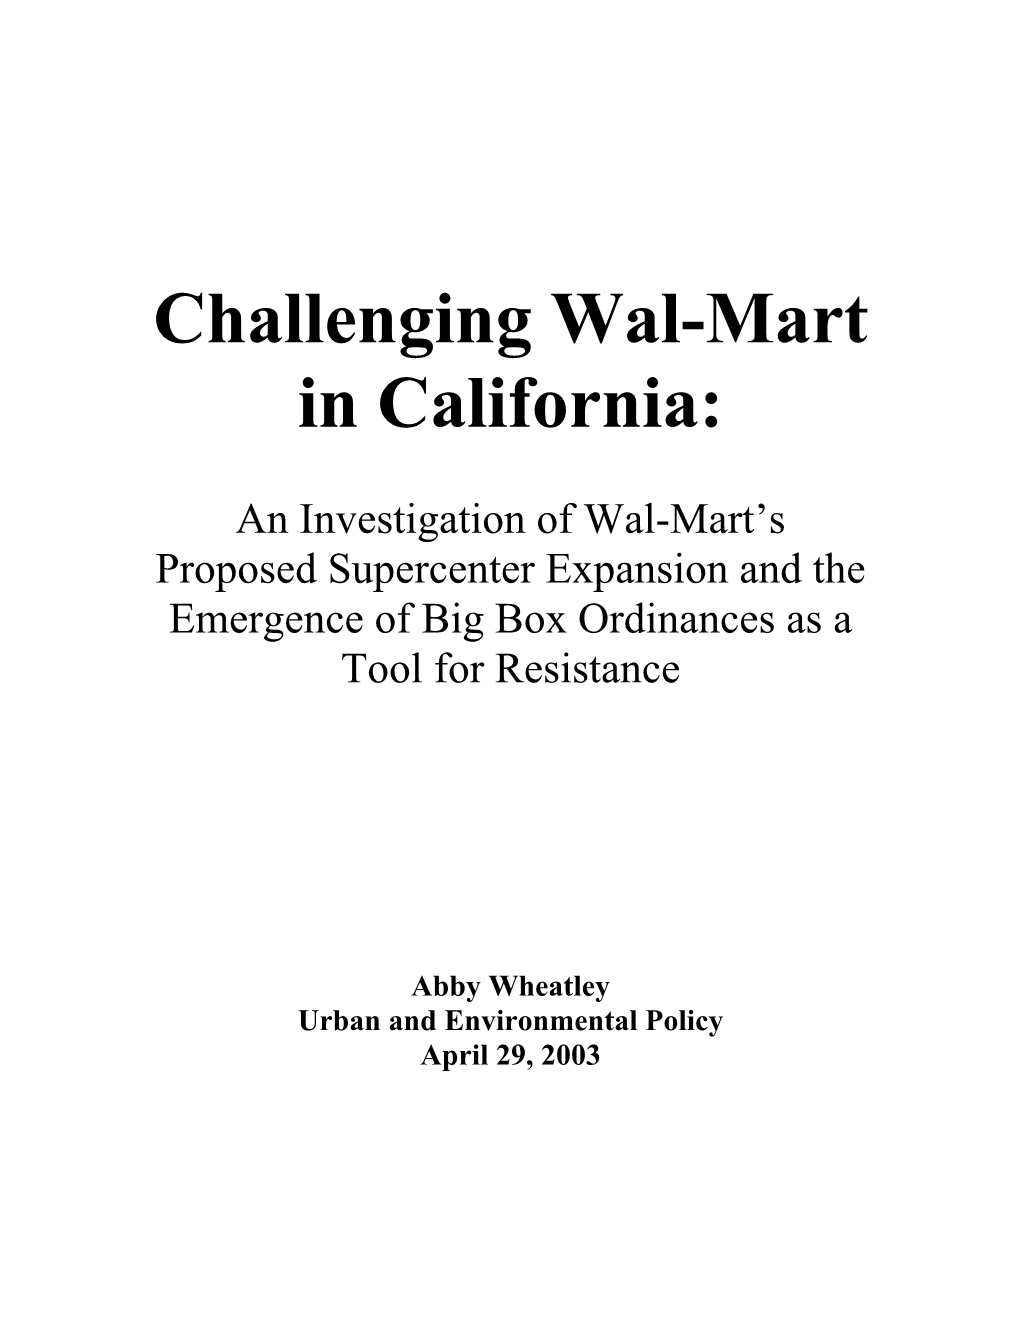 Challenging Wal-Mart in California